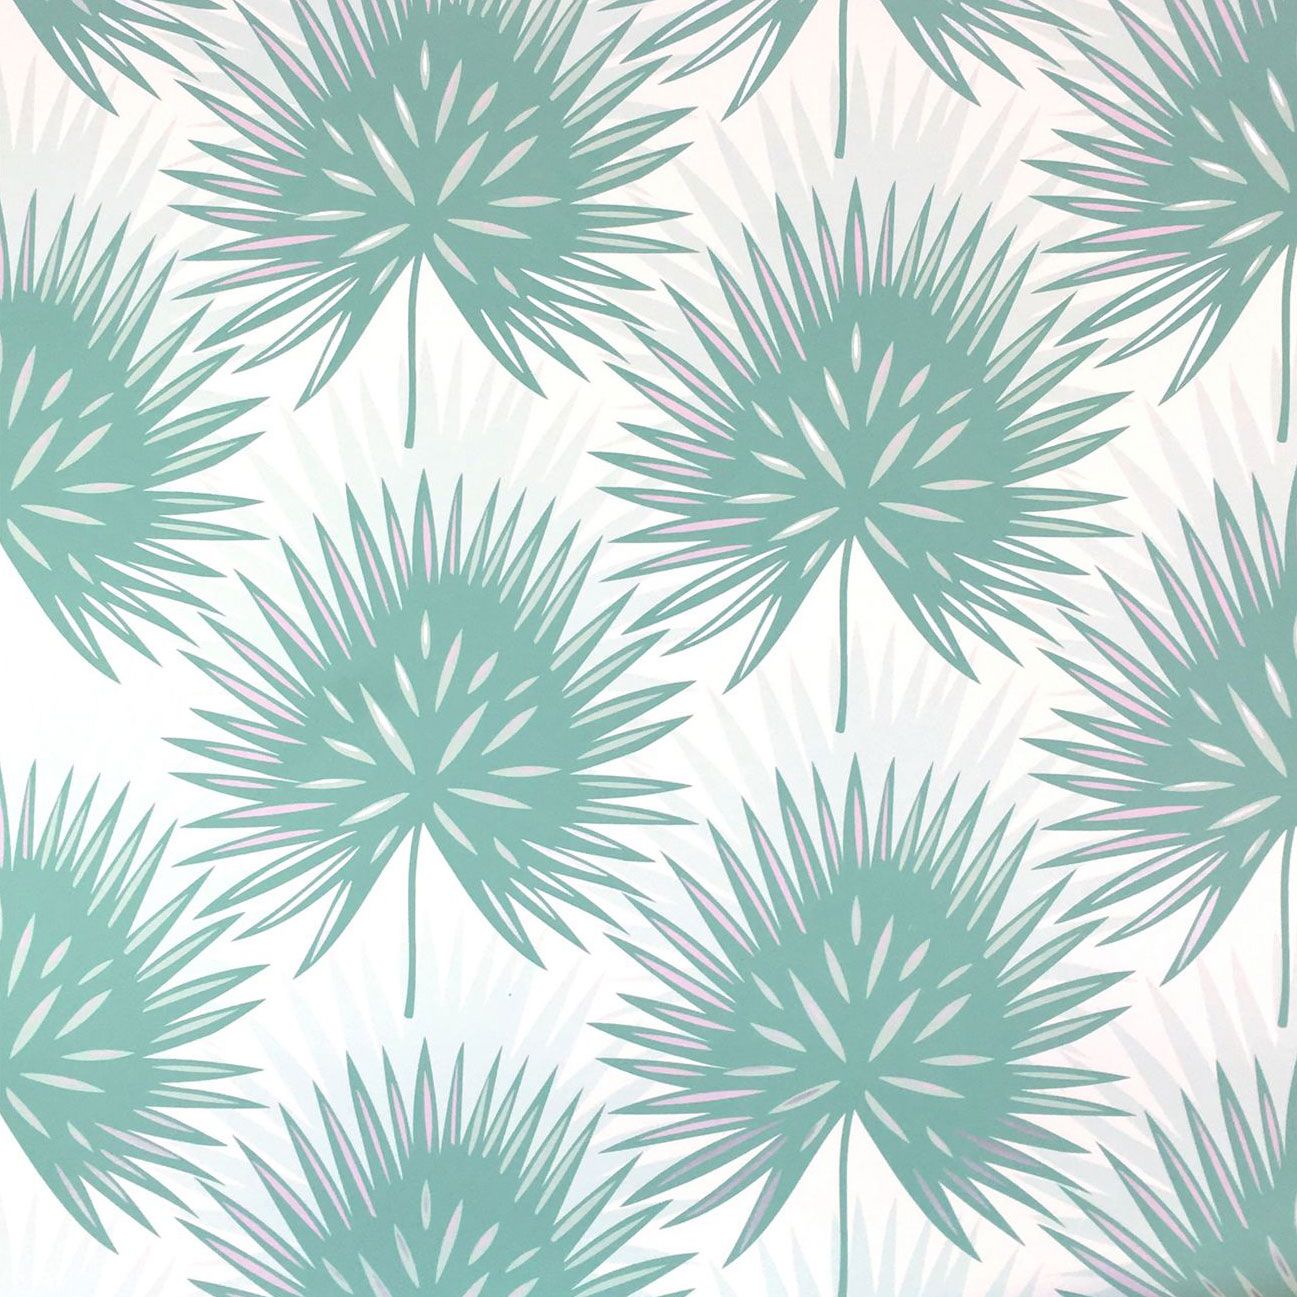 Gorgeous Wallpaper Designs to Transform Your Space